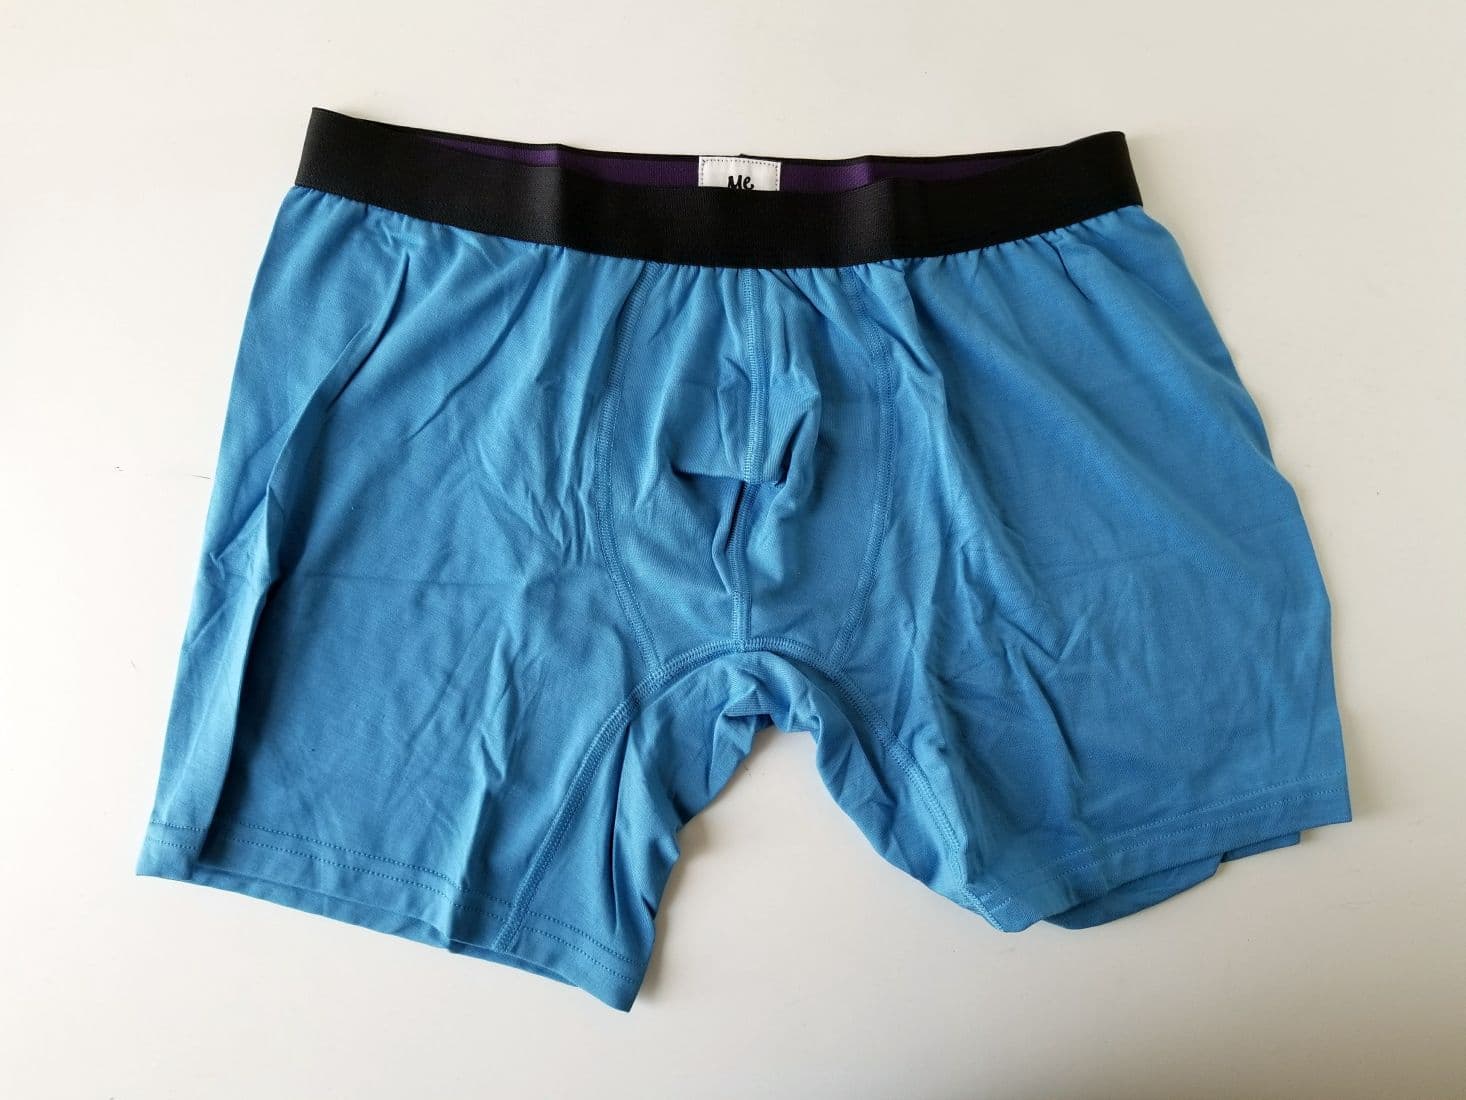 MeUndies for Men Underwear Subscription Review - May 2017 | MSA